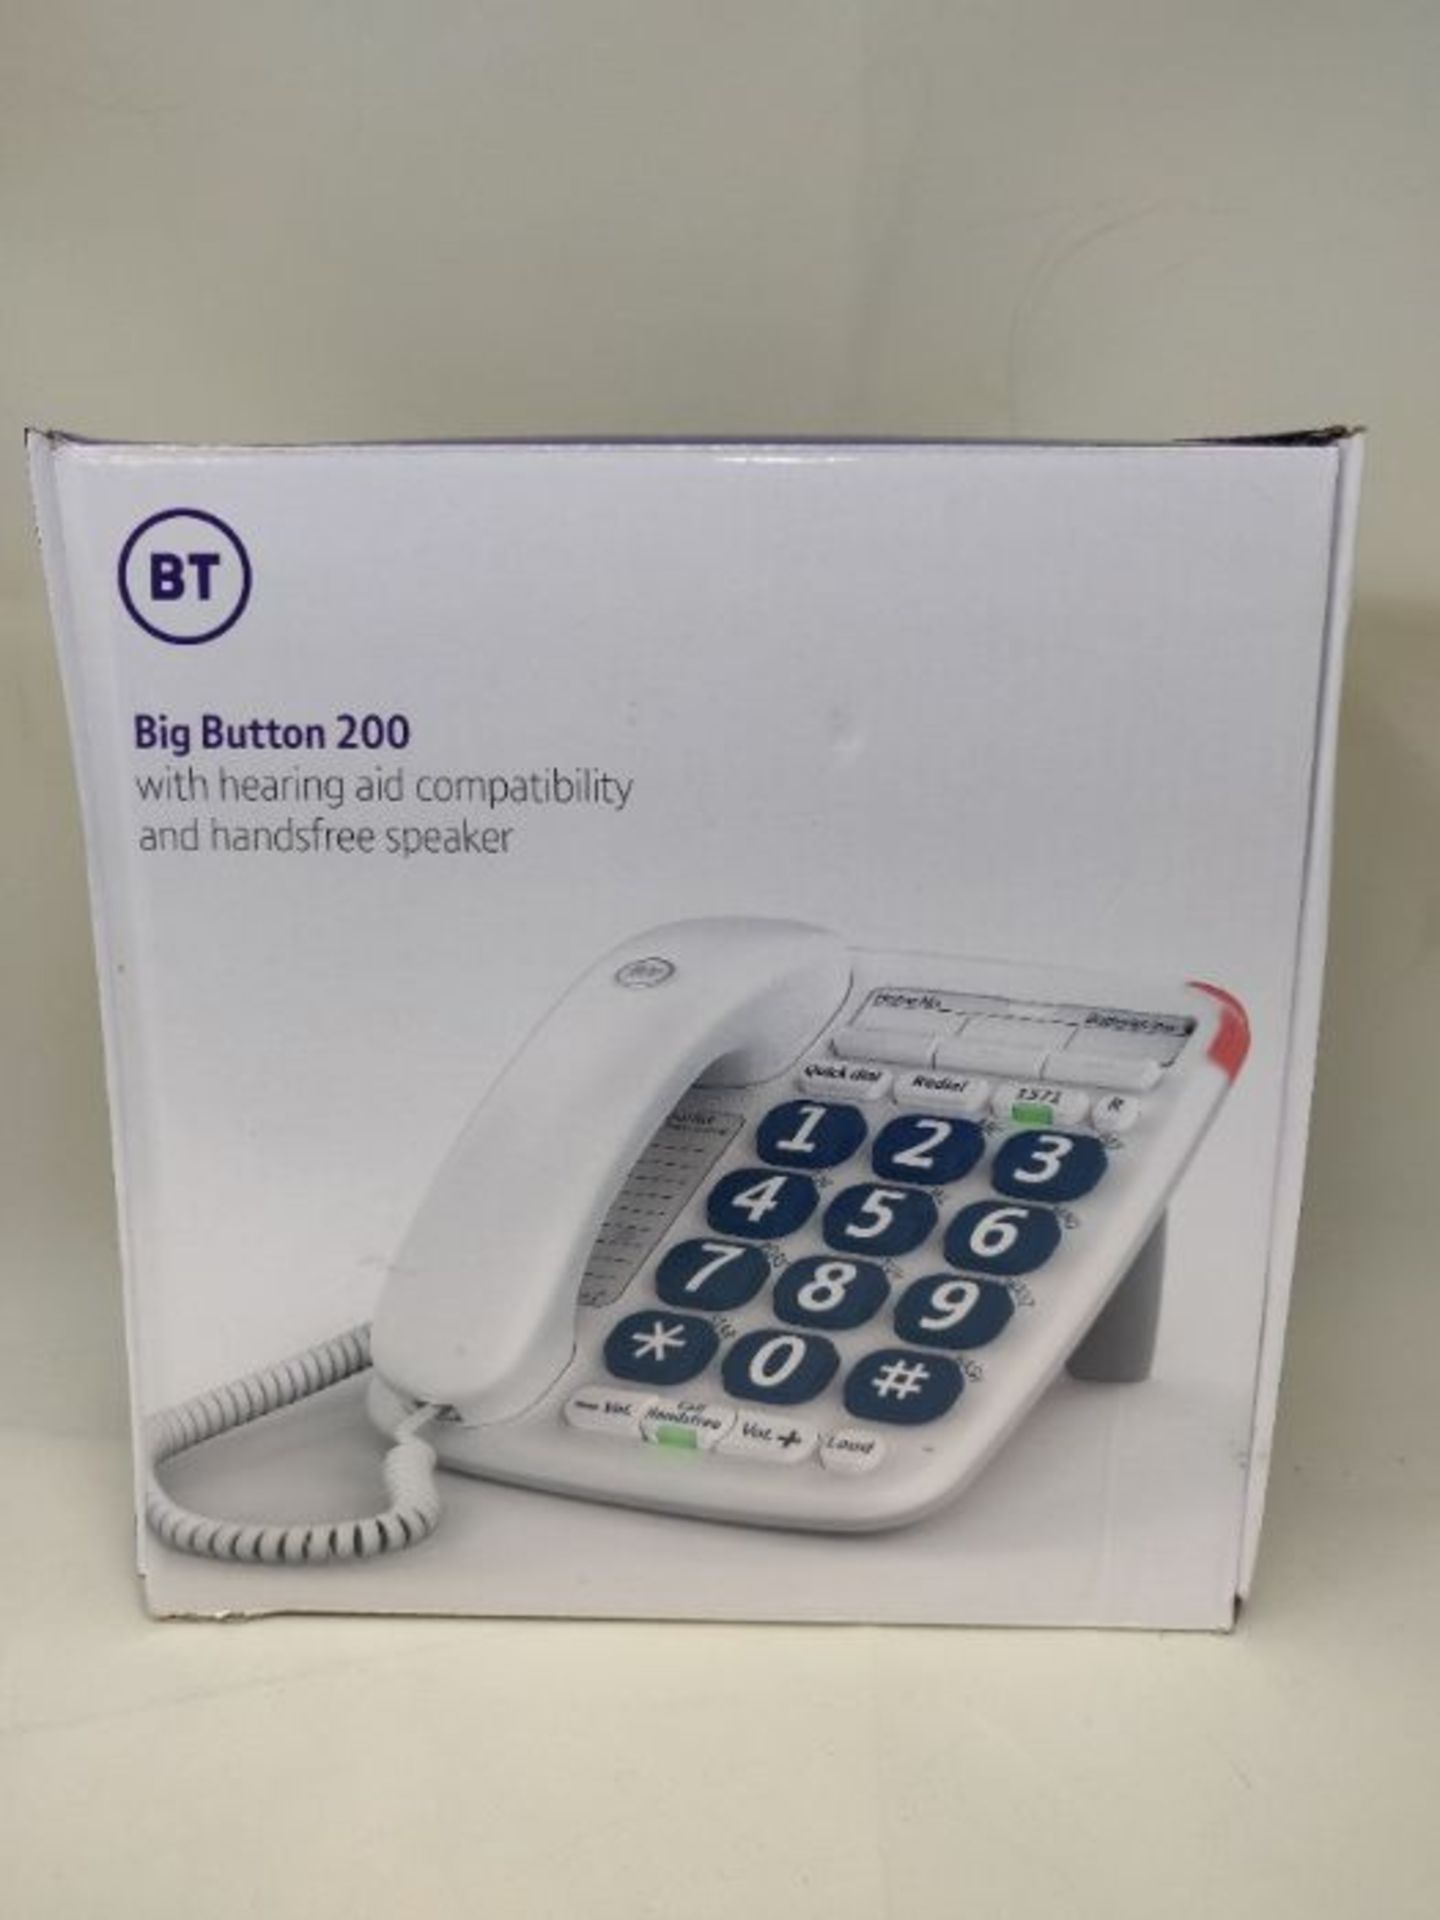 BT Big Button 200 Corded Telephone, White - Image 2 of 3